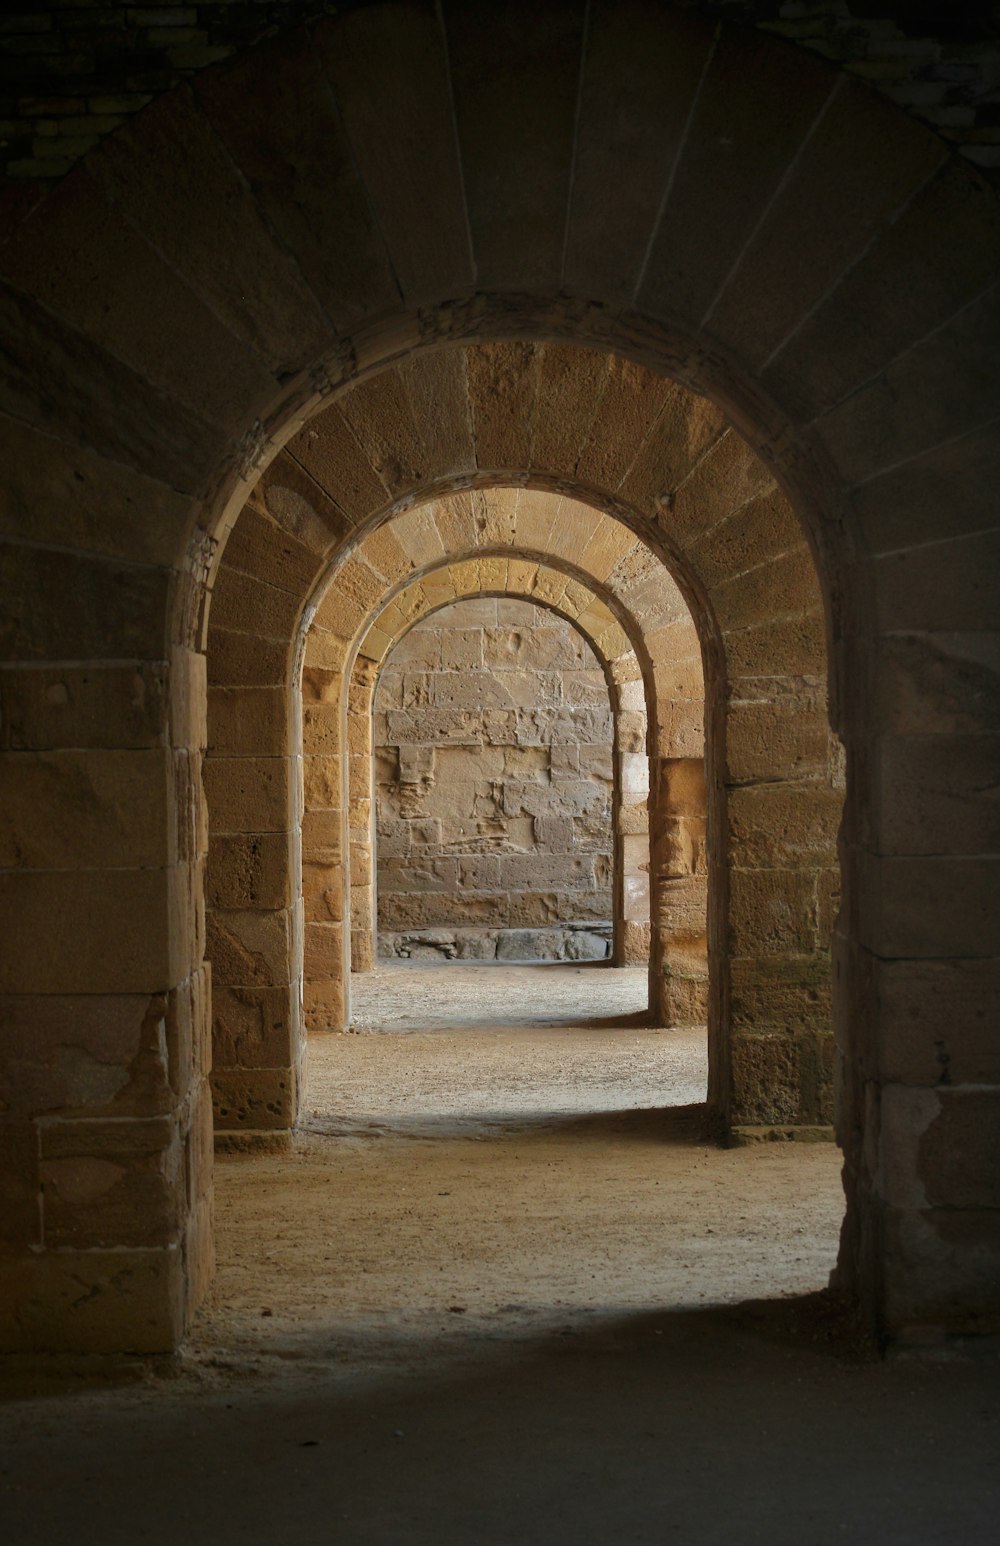 an archway in a stone building with light coming through